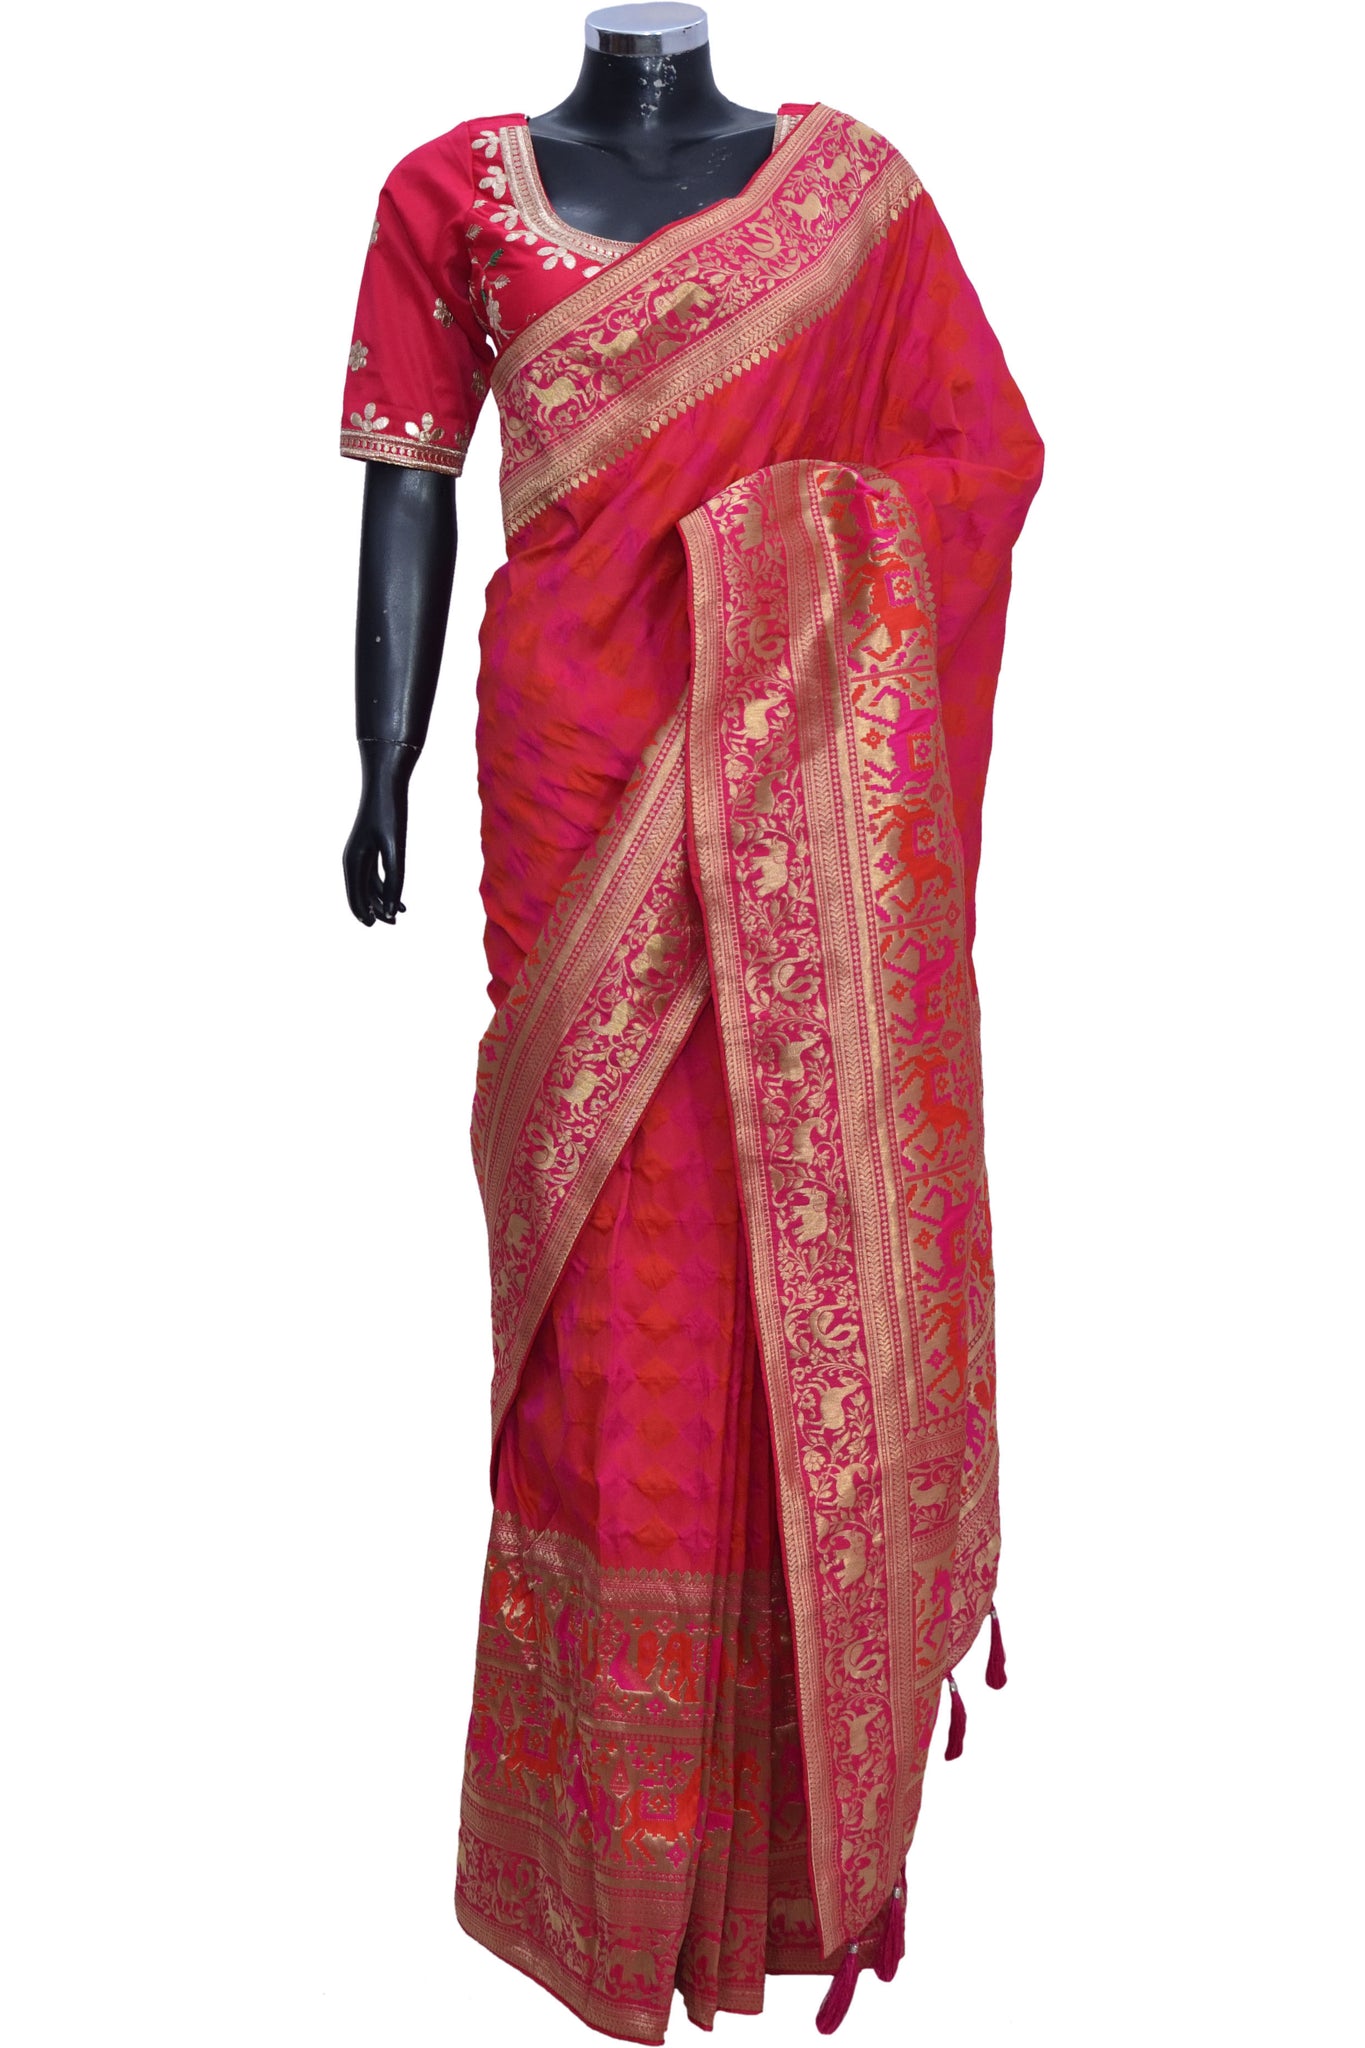 Silk Saree with embroidered blouse #fdn901183-301